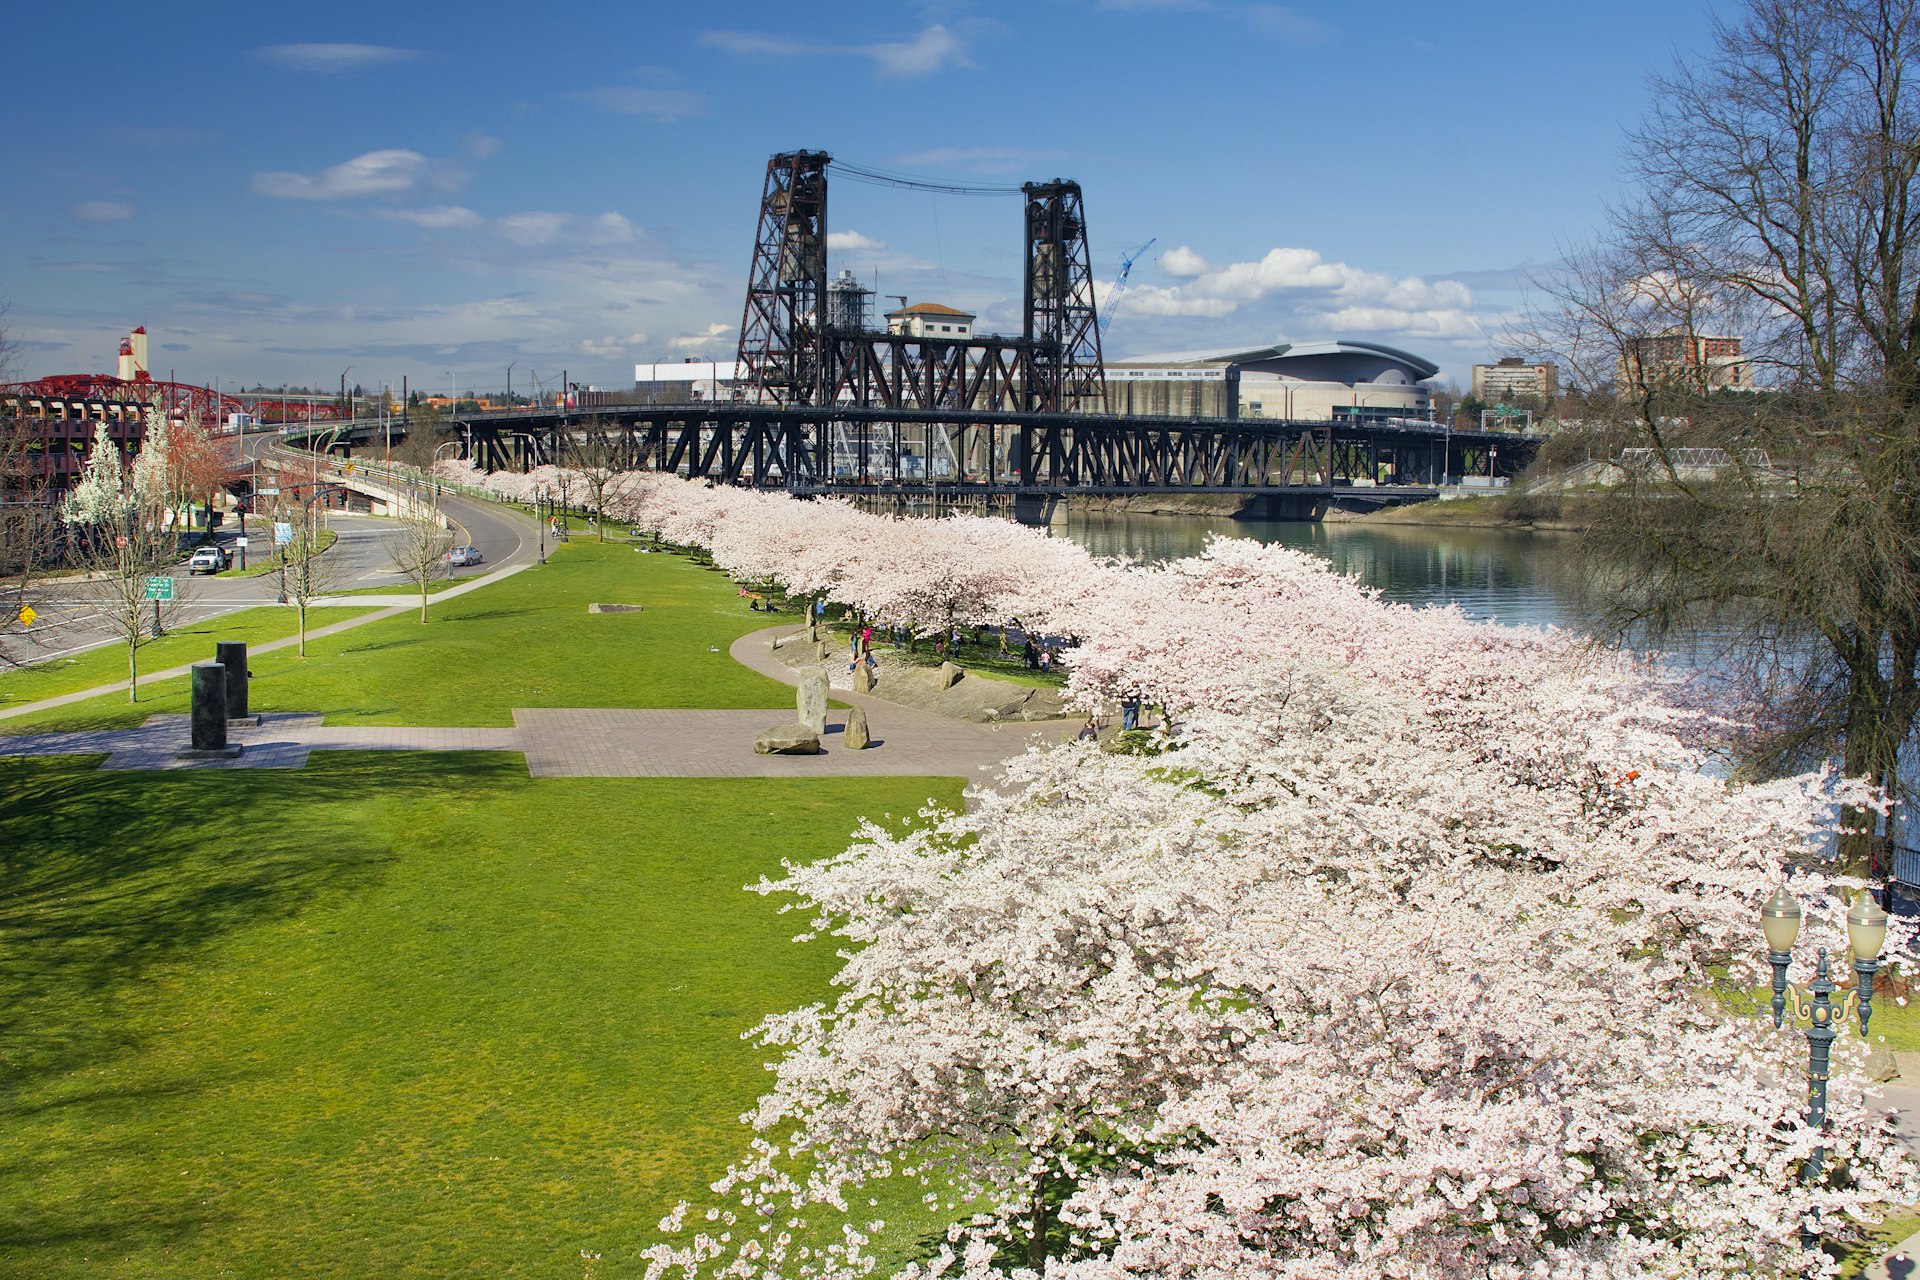 500px Photo ID: 30967941 - Cherry Blossoms at Portland Oregon Waterfront in Spring